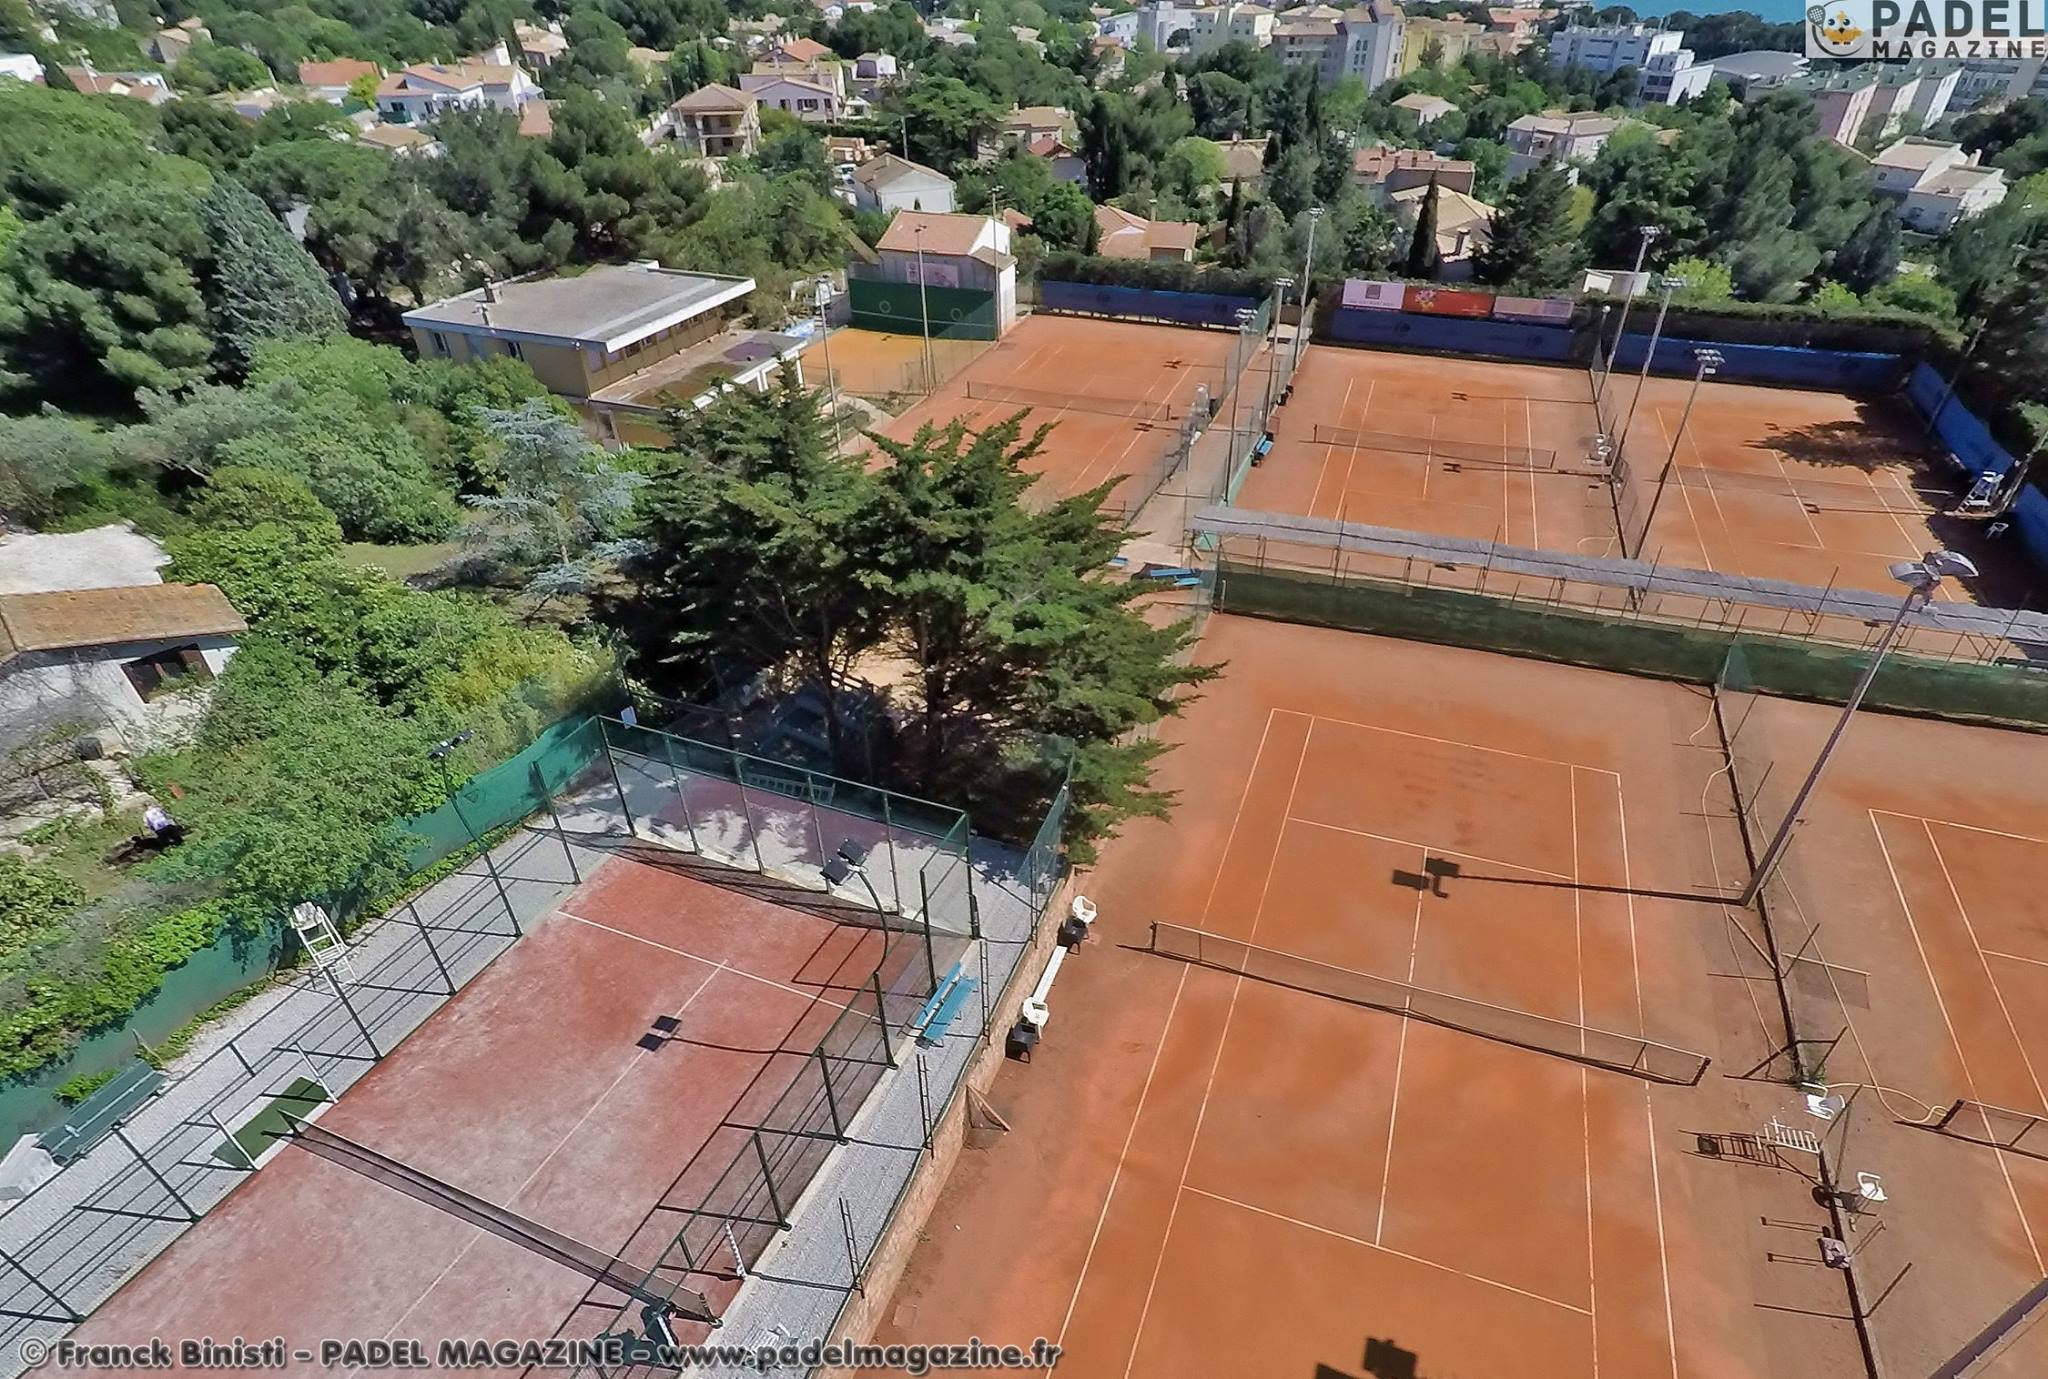 The Sète Tennis Club has the ambition to do more